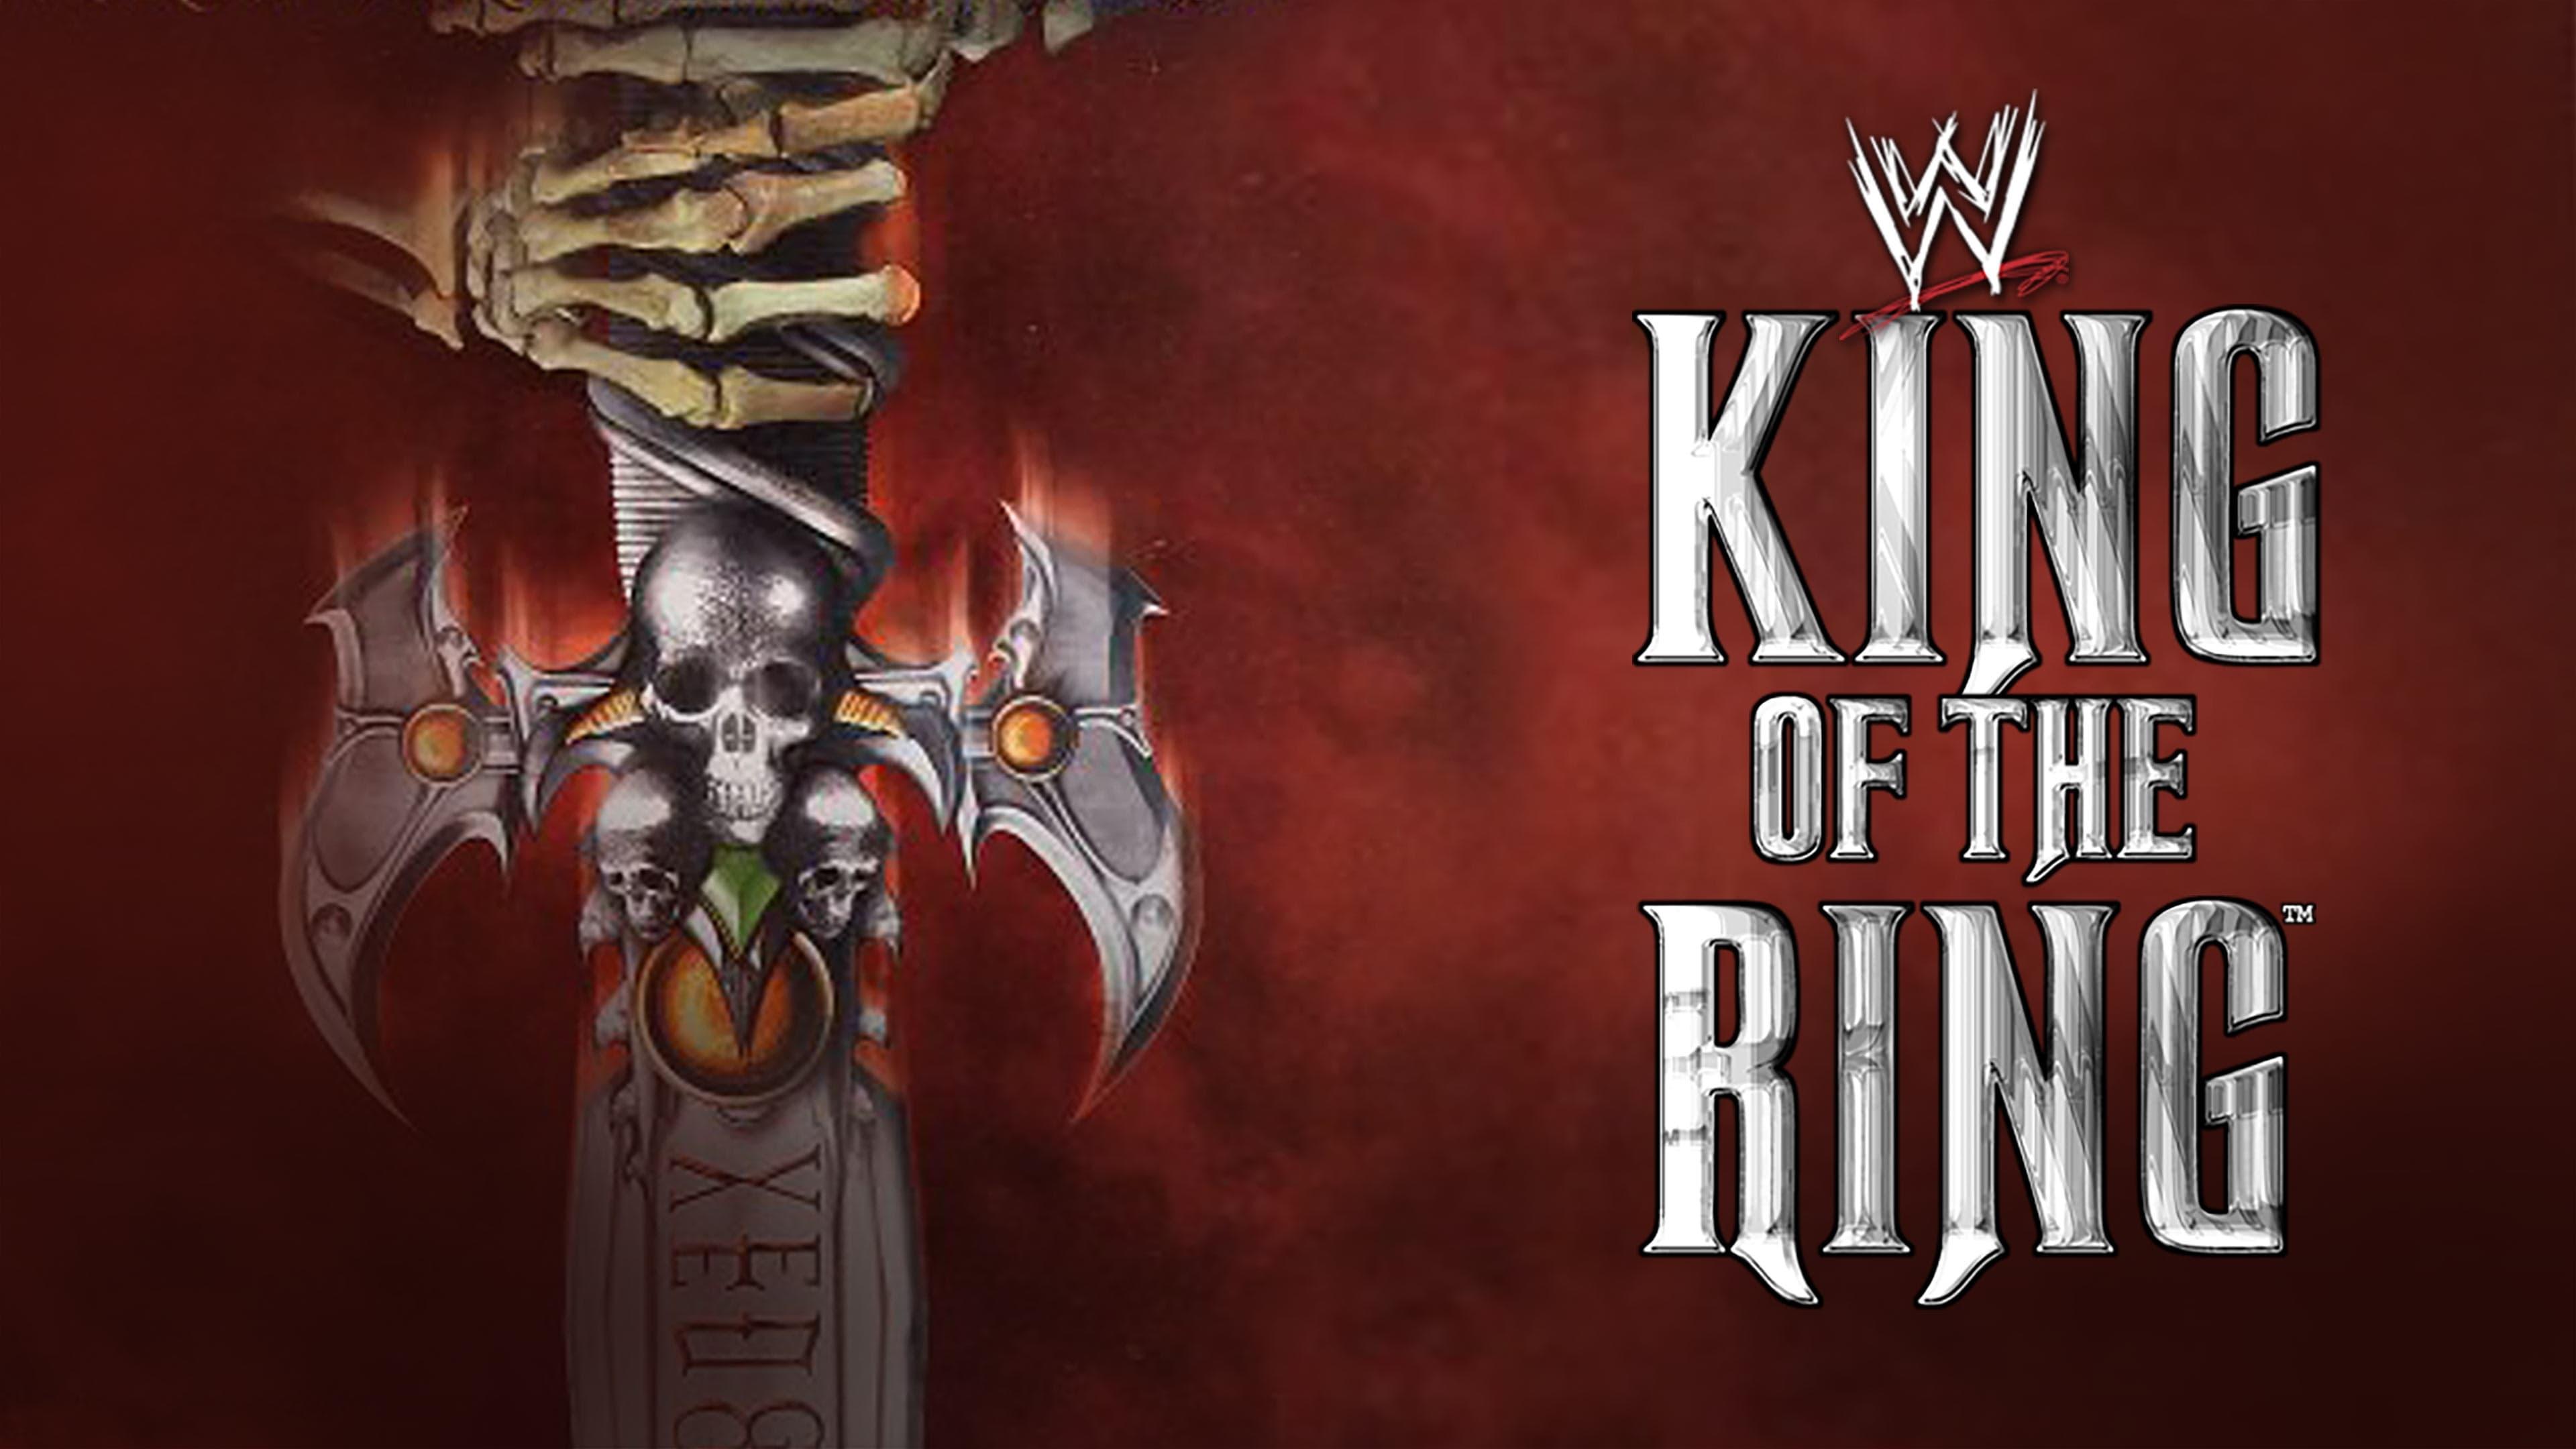 WWE King of the Ring 2000 backdrop